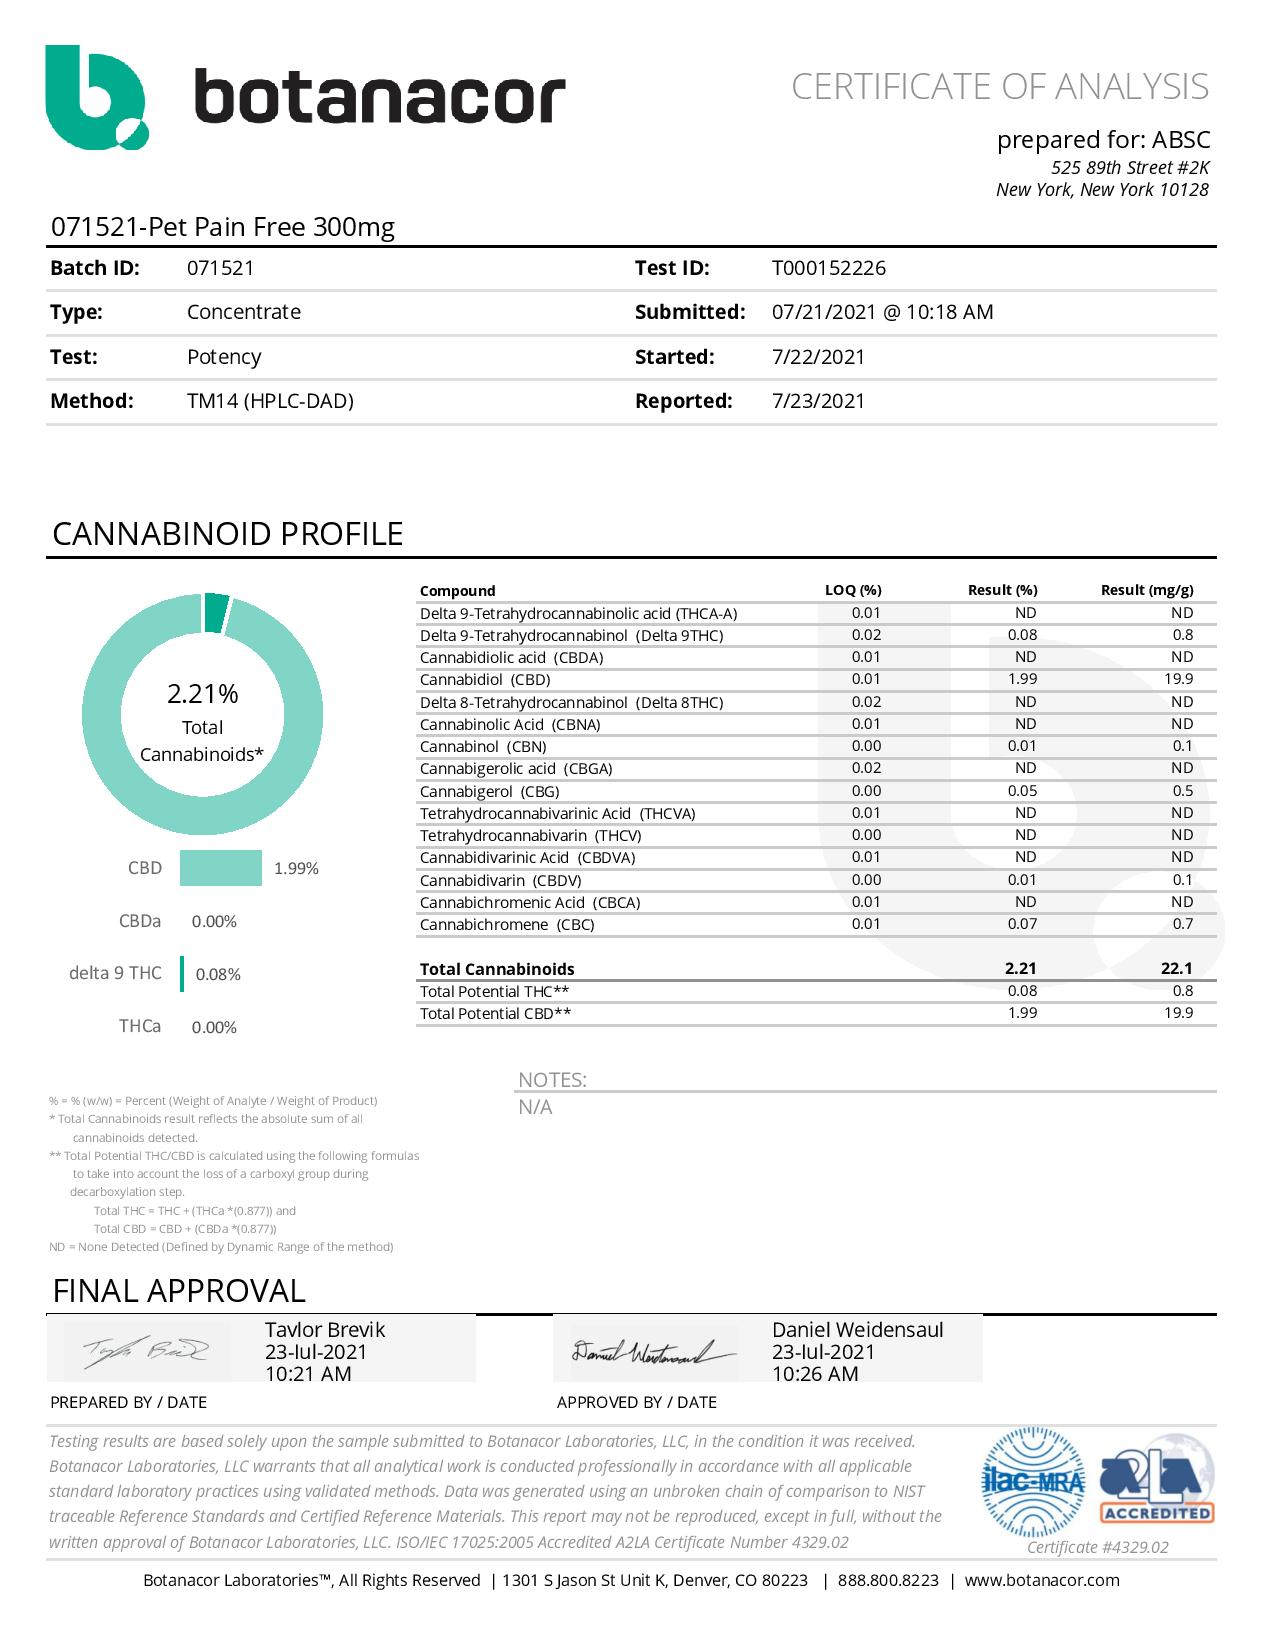 Applied Basic Science 300mg CBD oil certificate of analysis Batch 071521